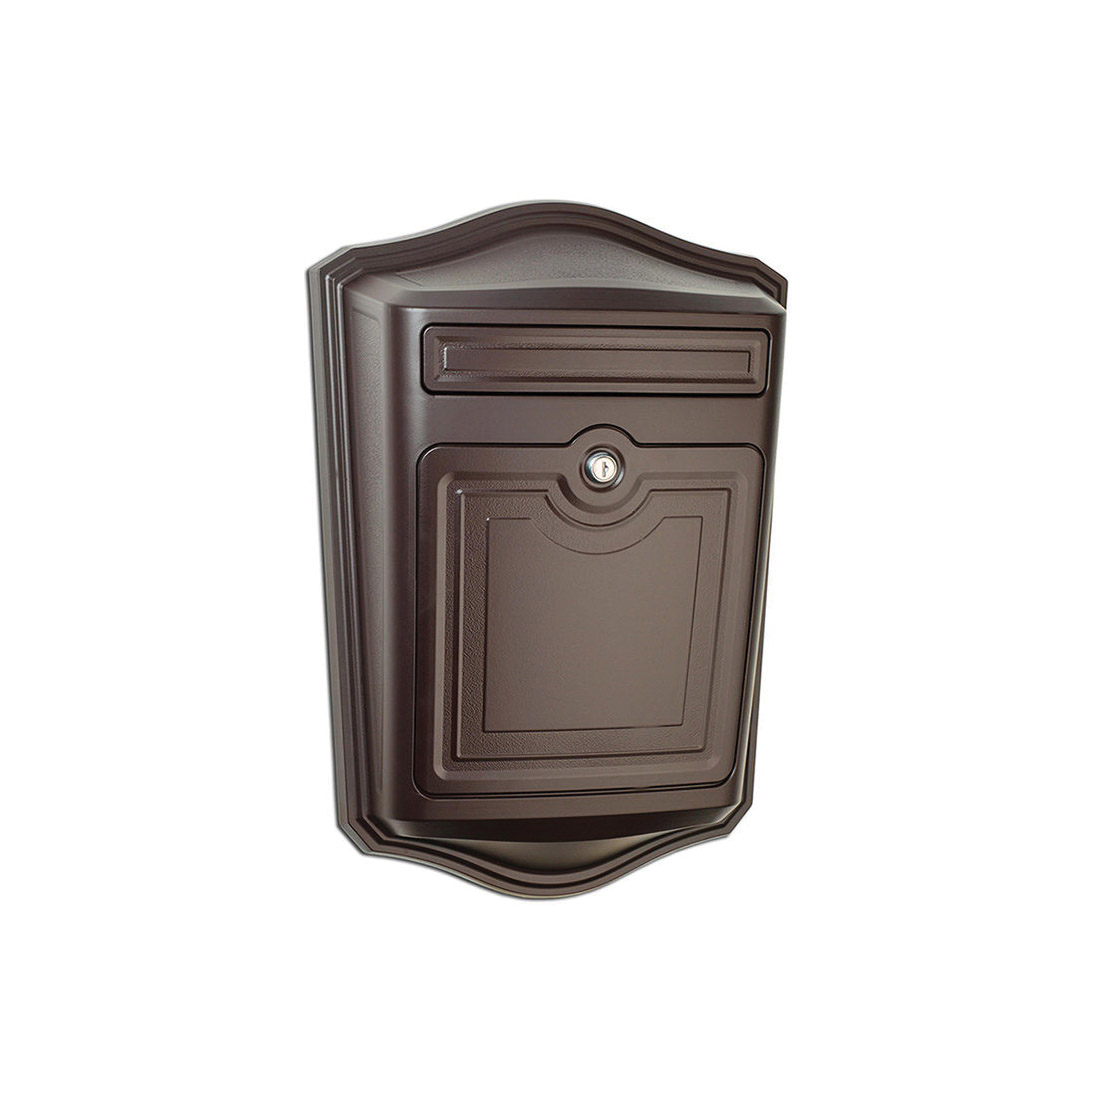 2540RZ-10 The Maison Mailbox, 407 cu-in Capacity, Aluminum/Steel, Rubbed Bronze, Brown